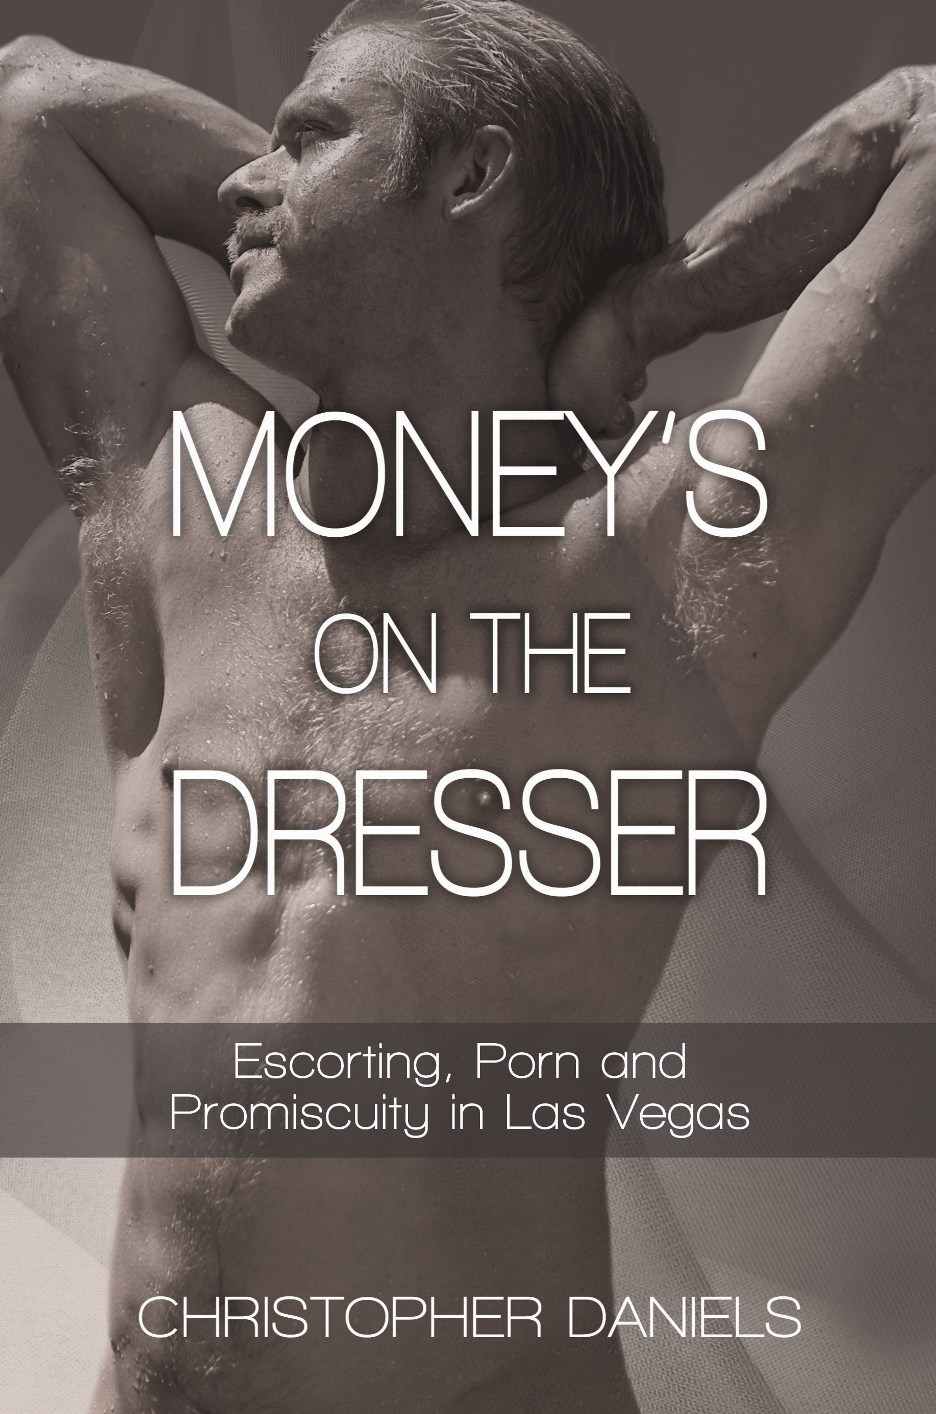 Money's on the Dresser: Escorting, Porn and Promiscuity in Las Vegas